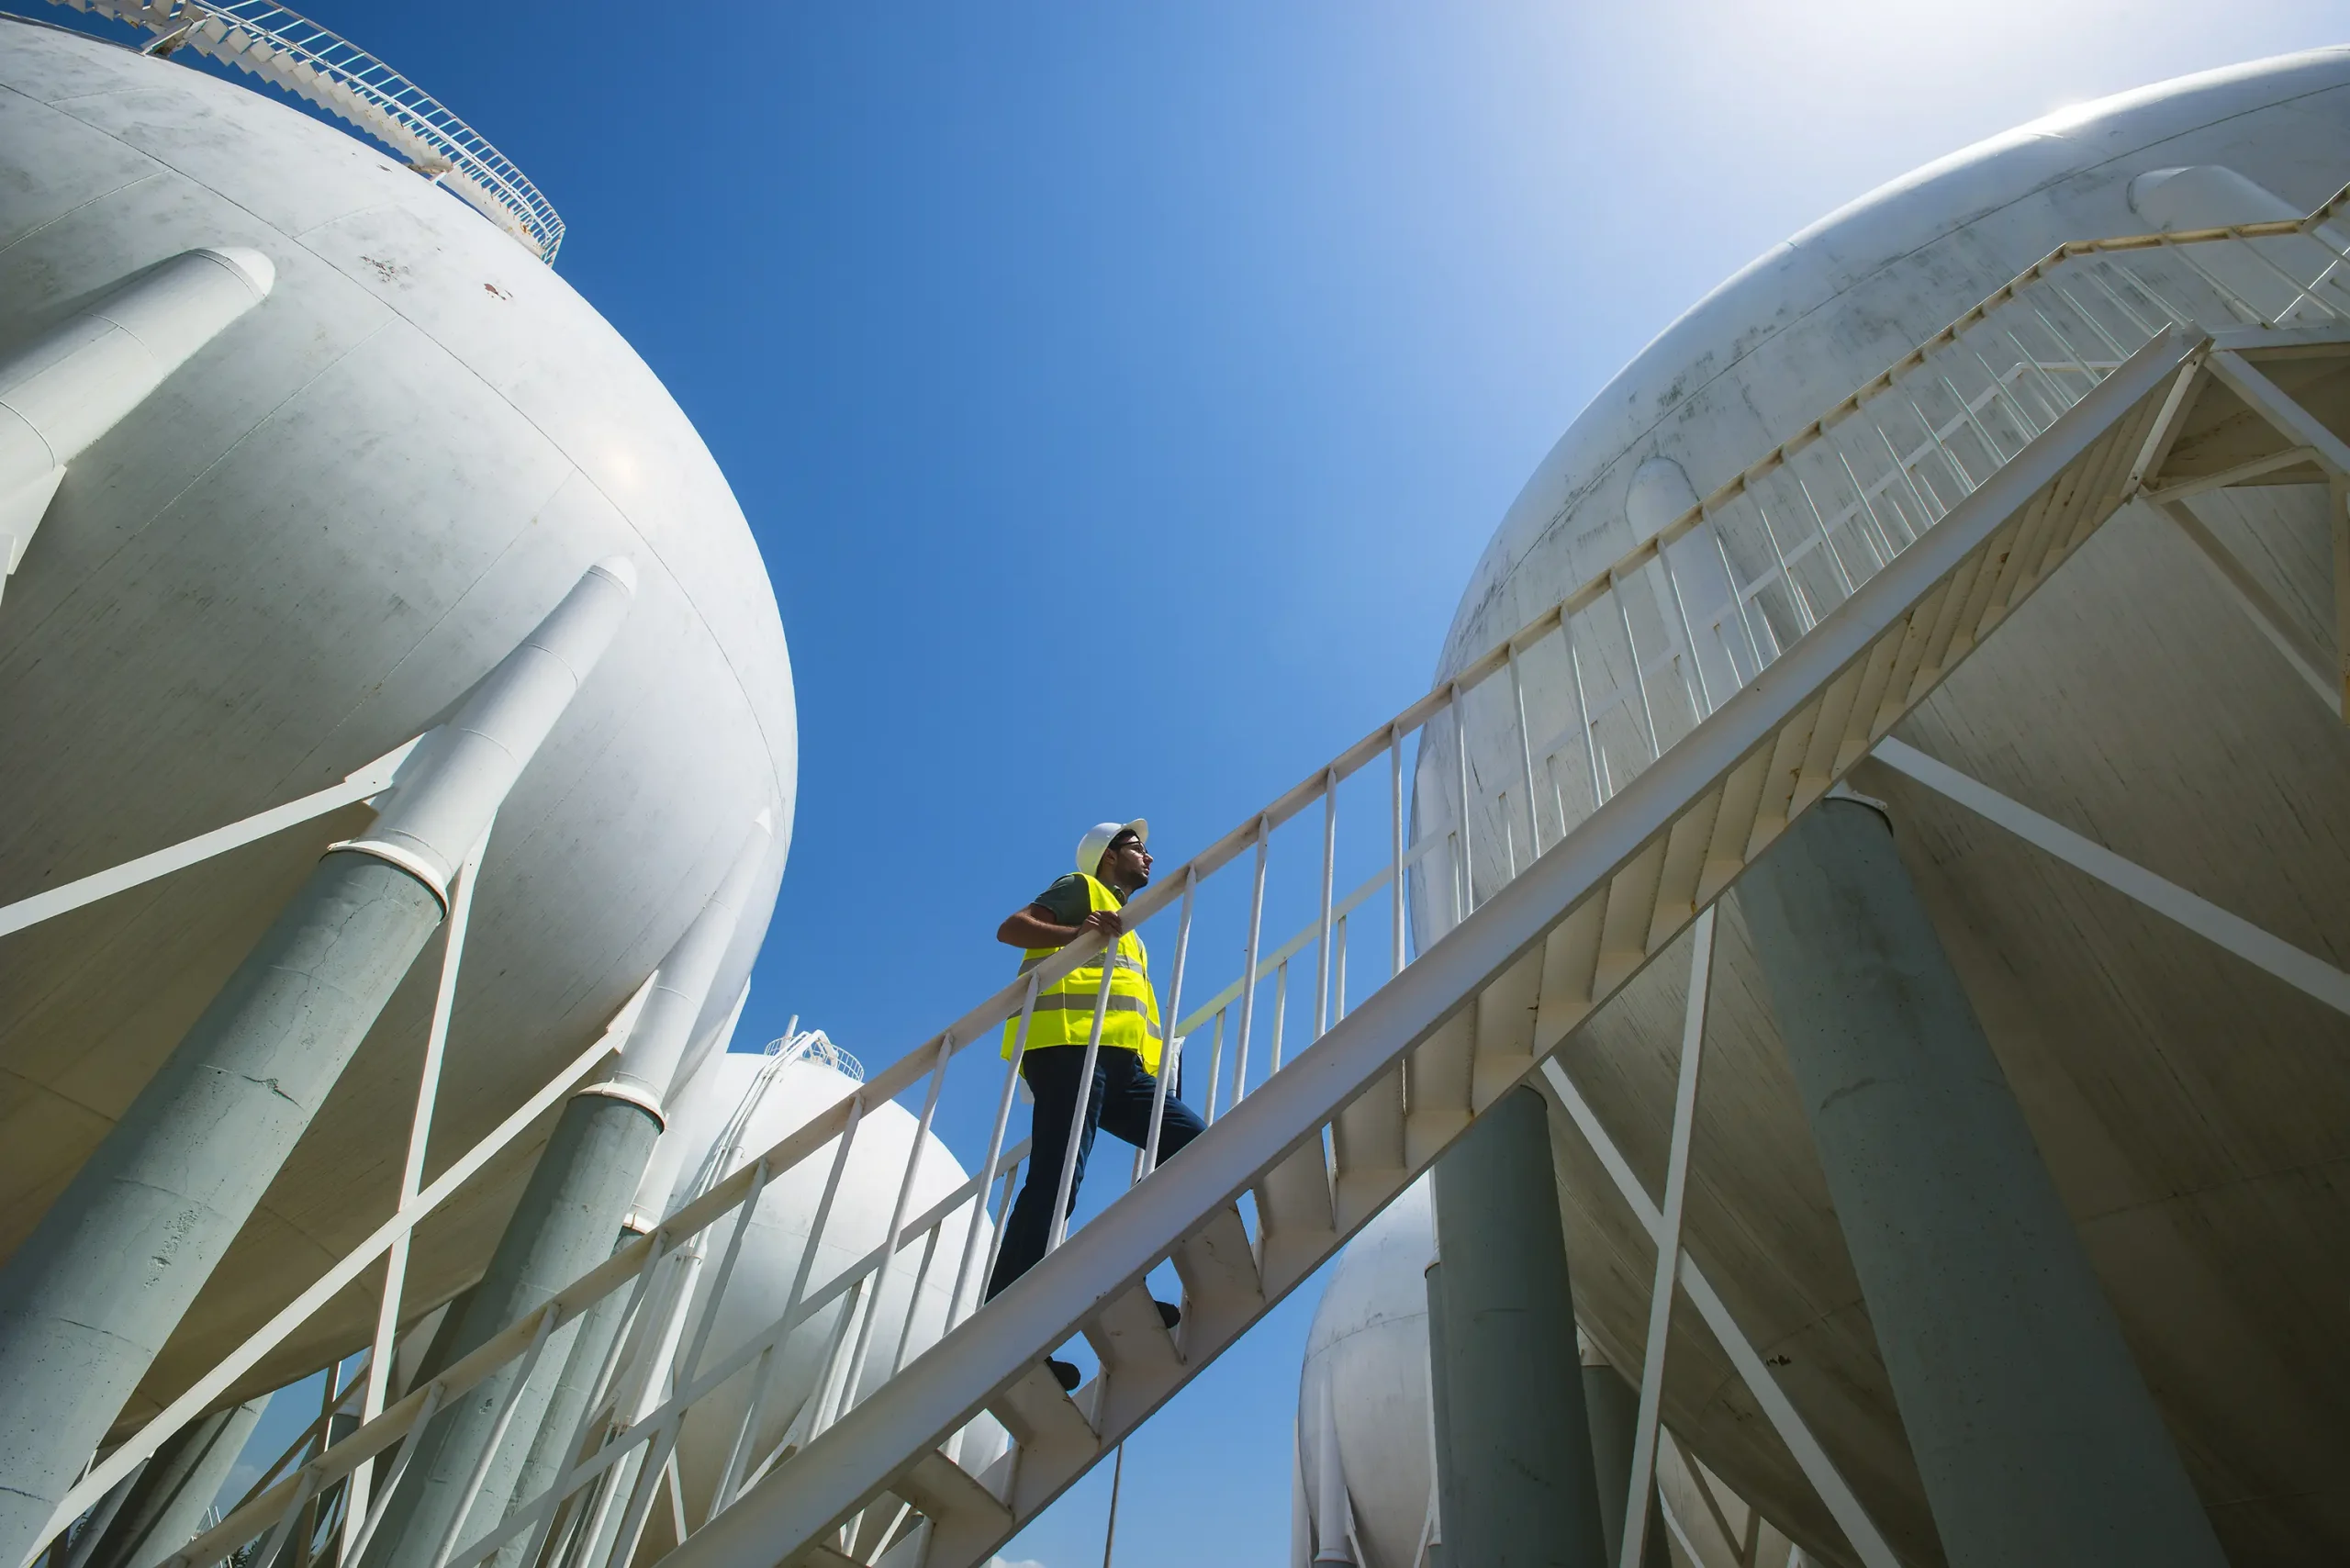 These LPG storage tanks are important because it enables us to use this valuable fuel source safely and efficiently while minimising the risk of accidents and ensuring the protection of both people and the environment